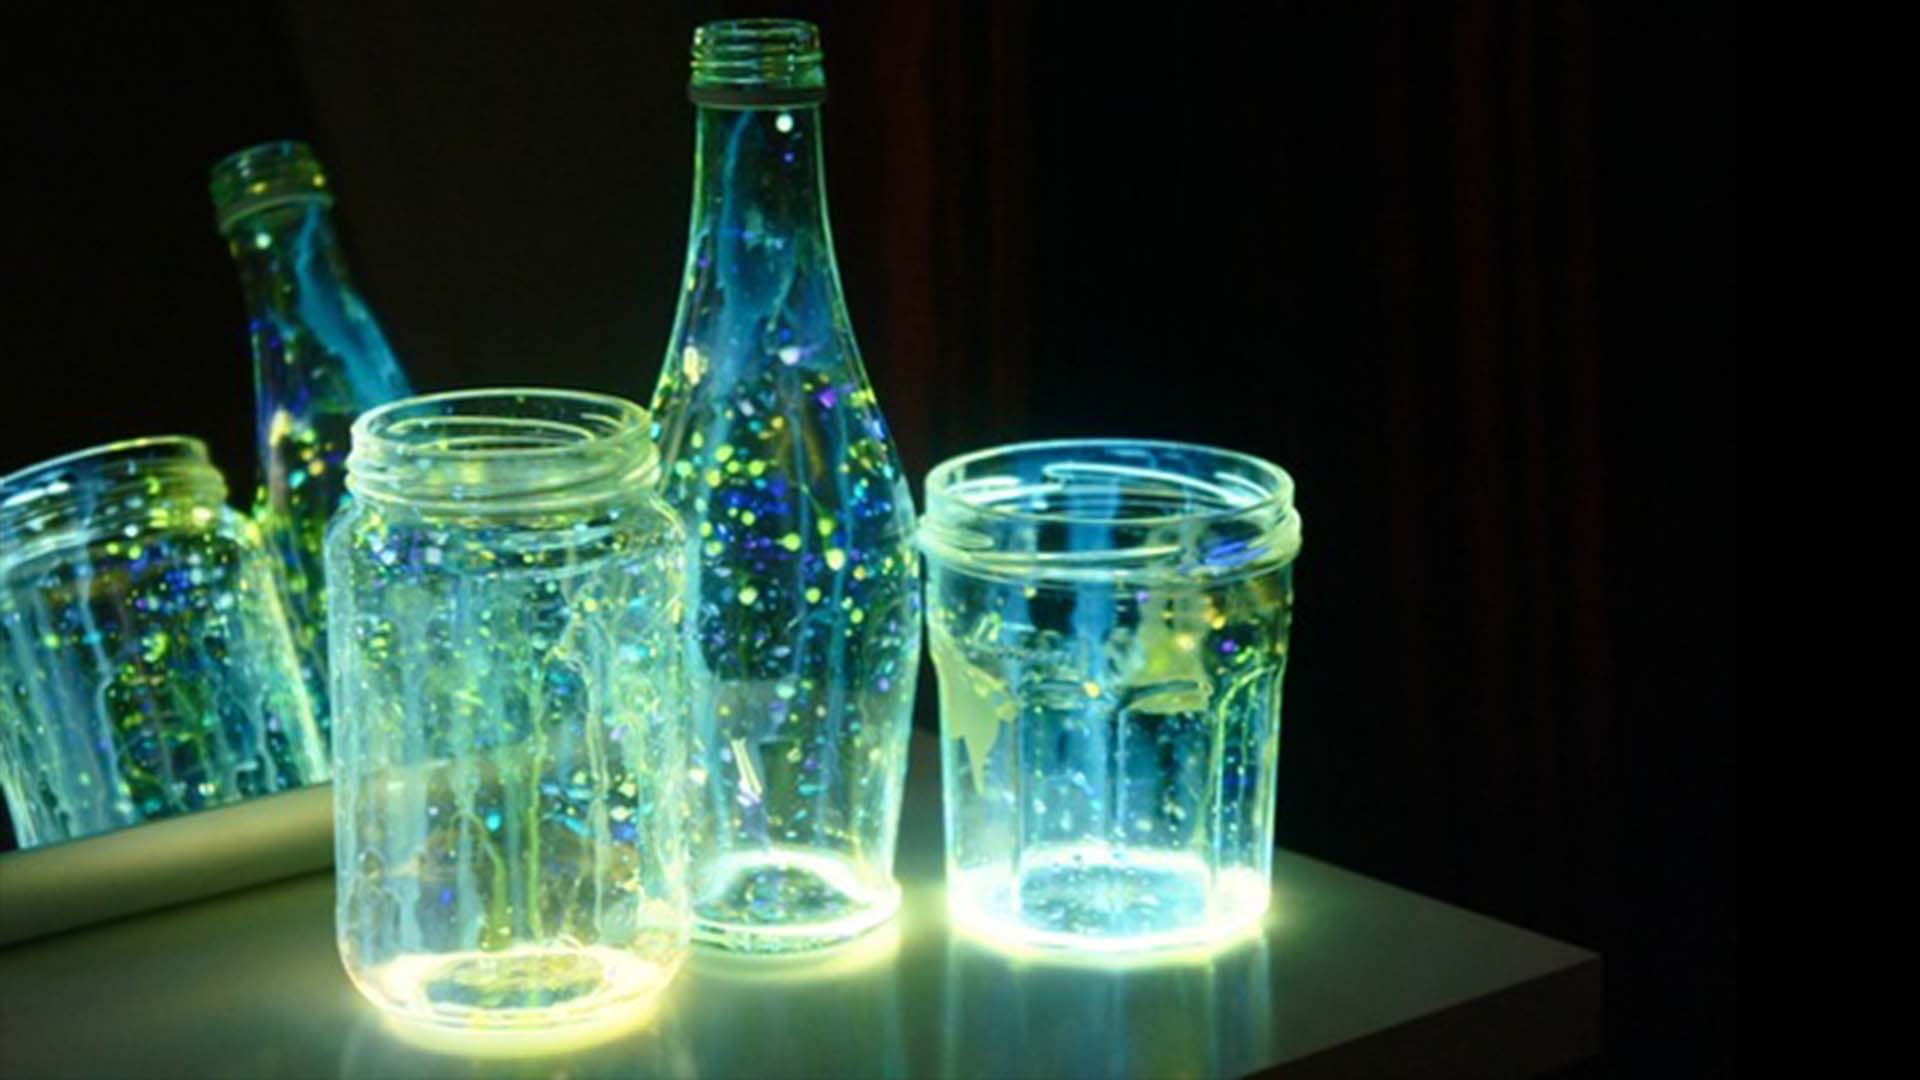 How to Create a Starry Bottle